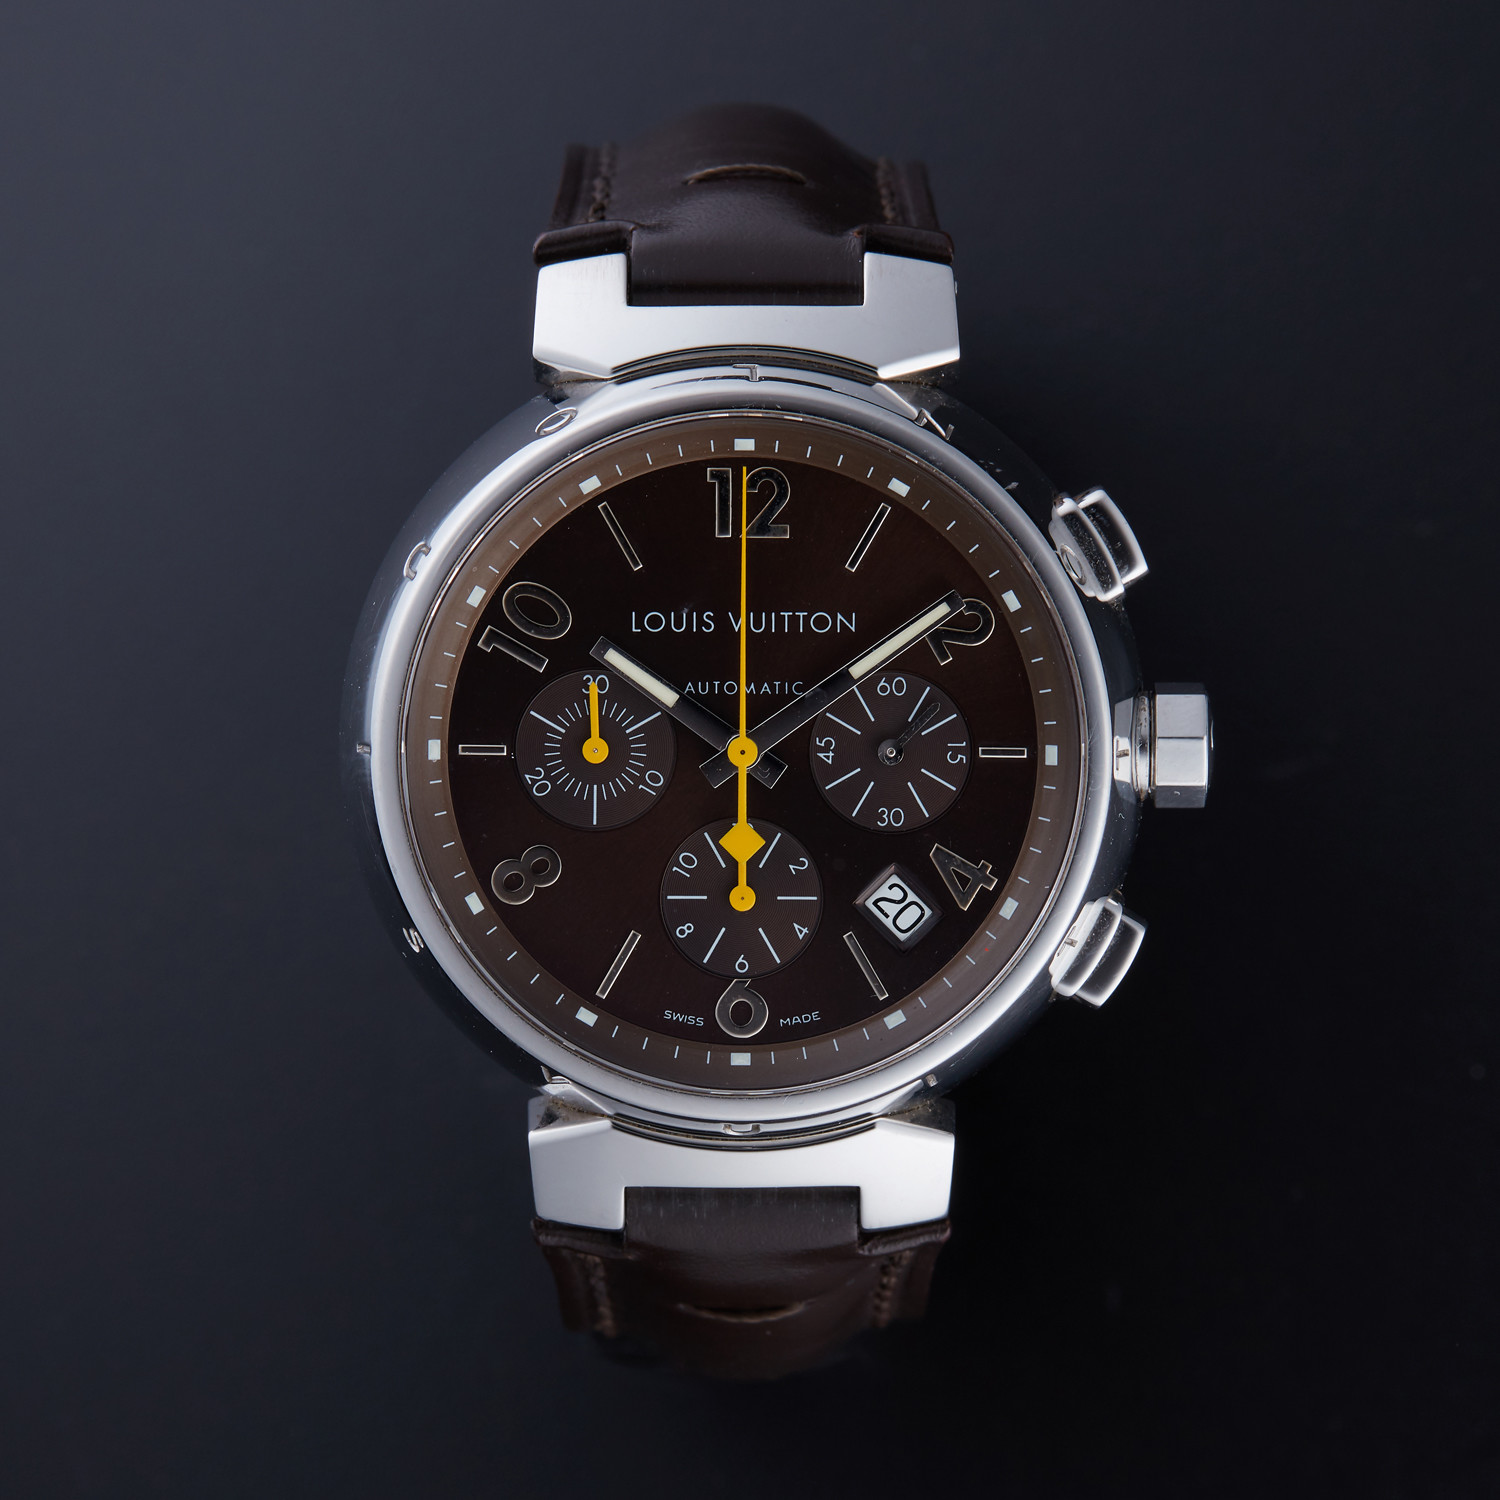 Louis Vuitton Tambour Chronograph Automatic // Q1121 // Pre-Owned - Outstanding Timepieces ...